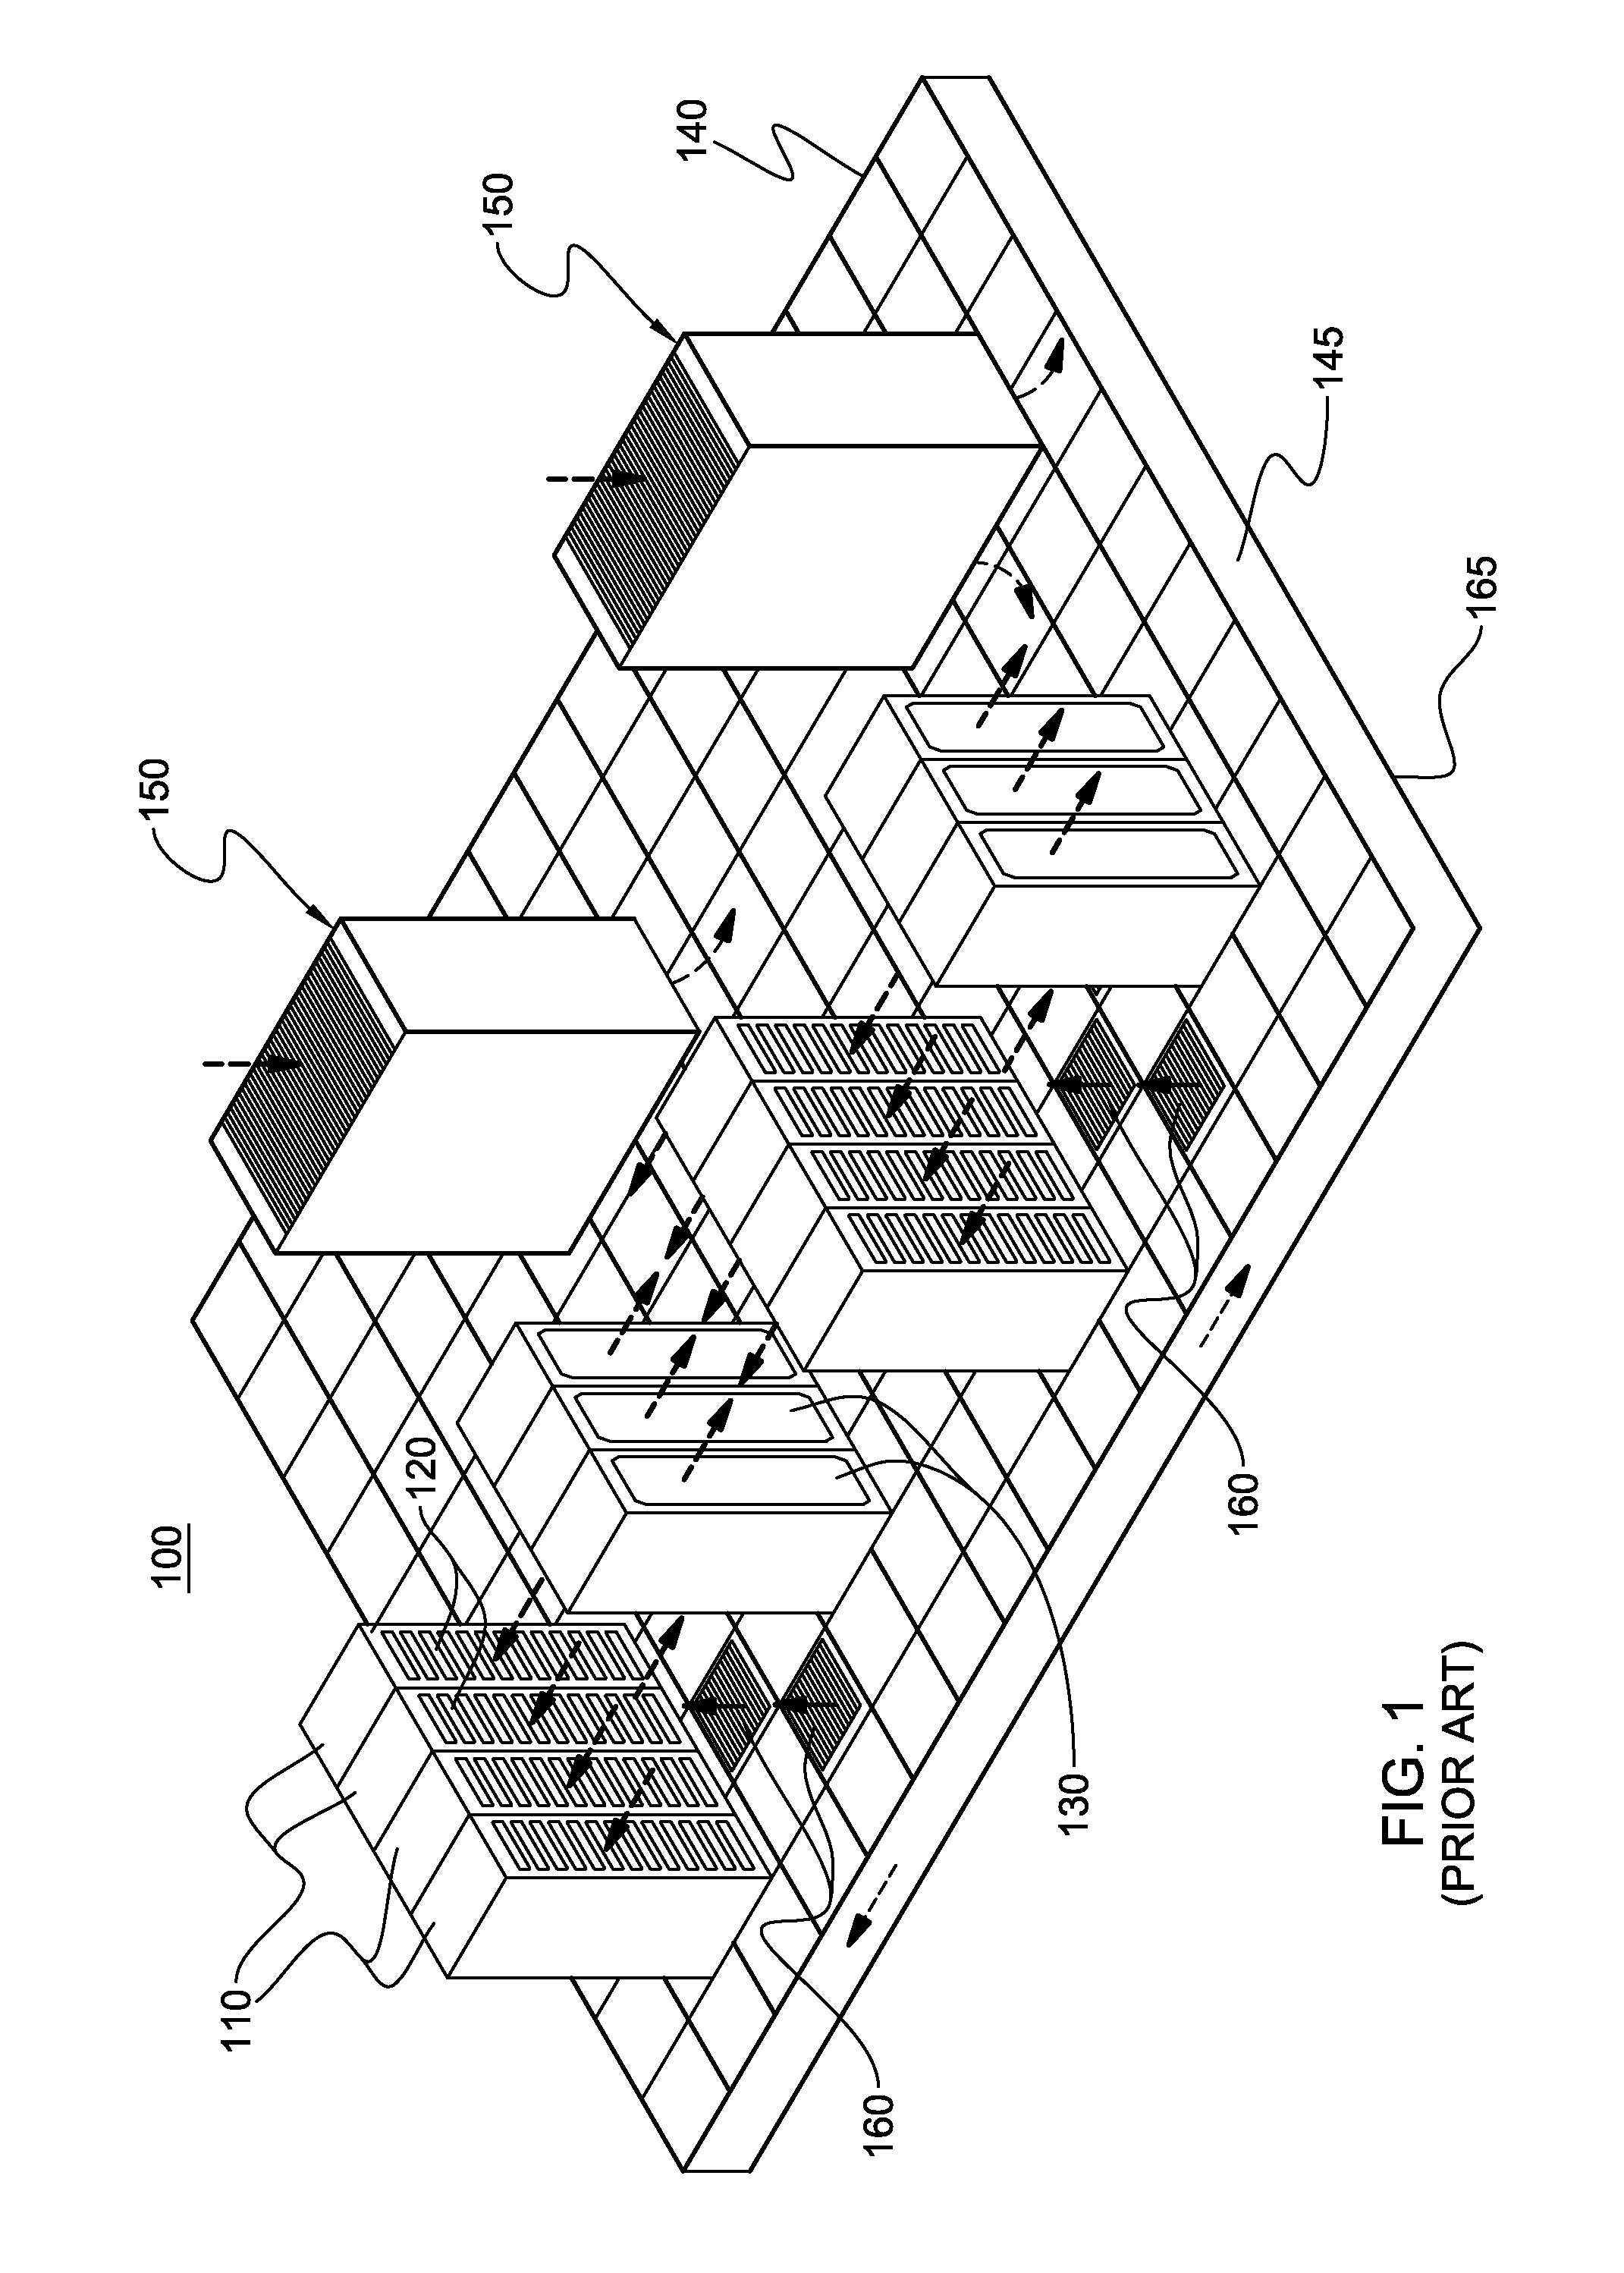 System and method for facilitating parallel cooling of liquid-cooled electronics racks